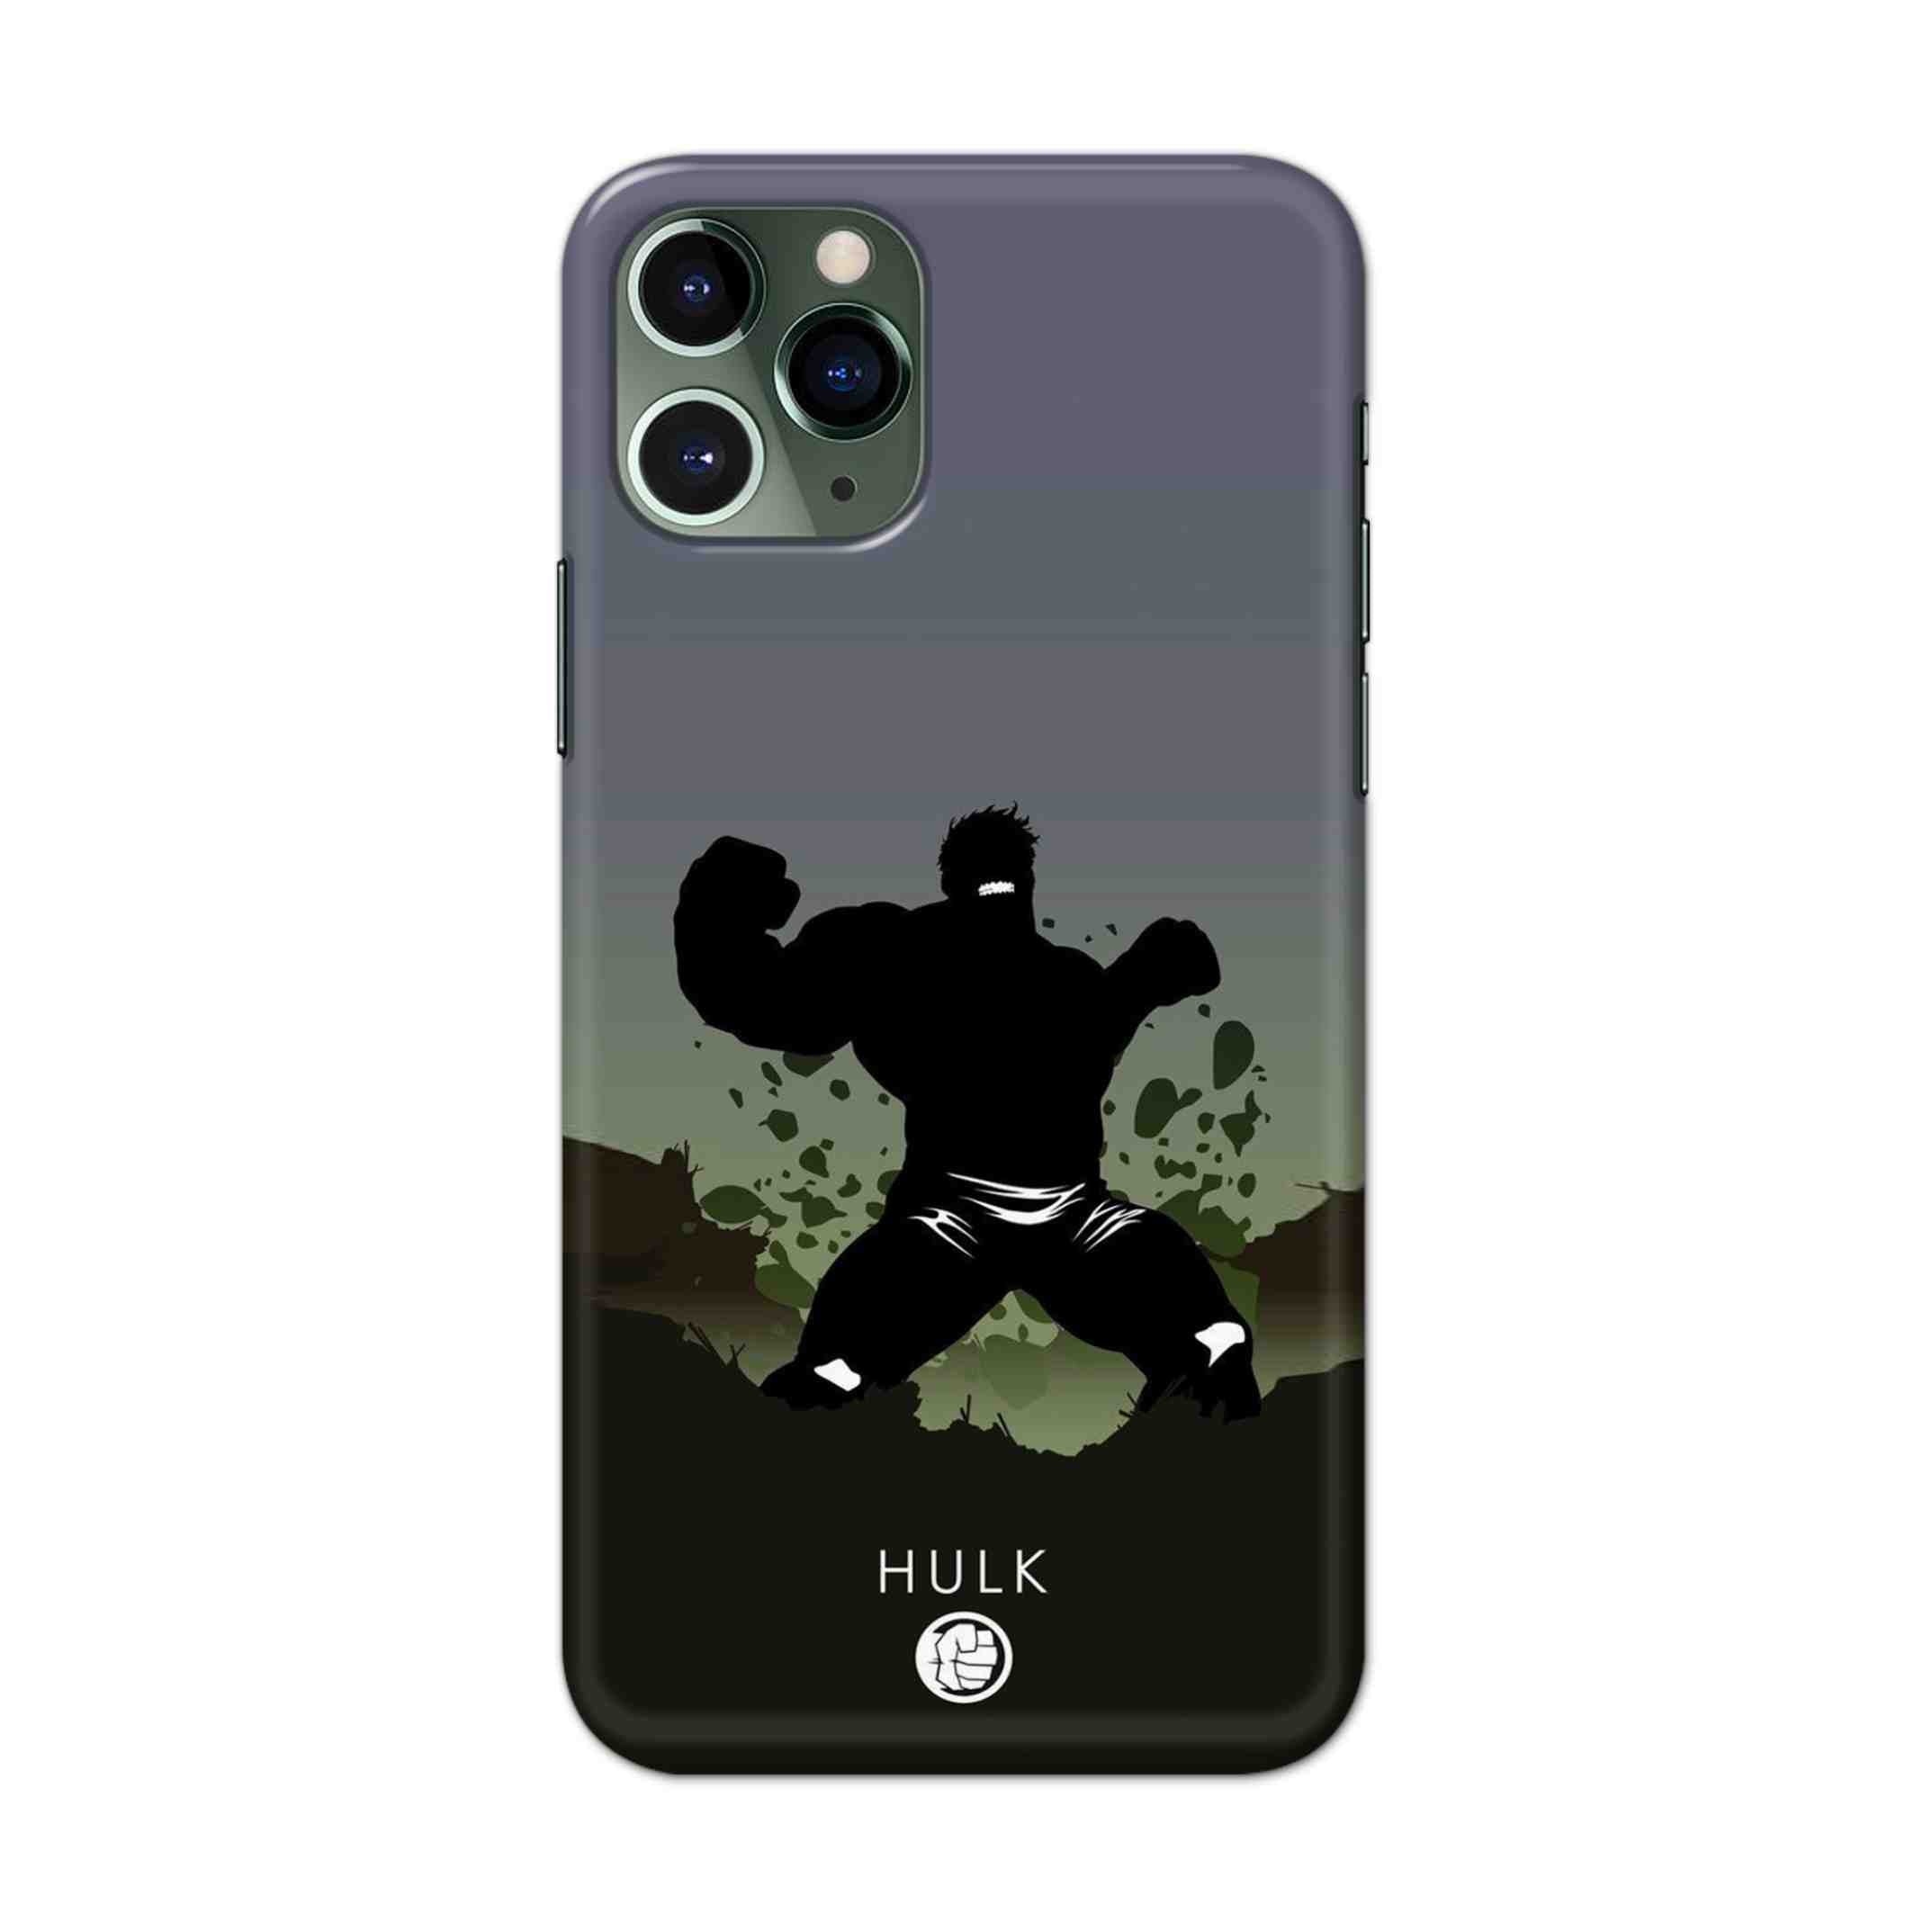 Buy Hulk Drax Hard Back Mobile Phone Case/Cover For iPhone 11 Pro Online